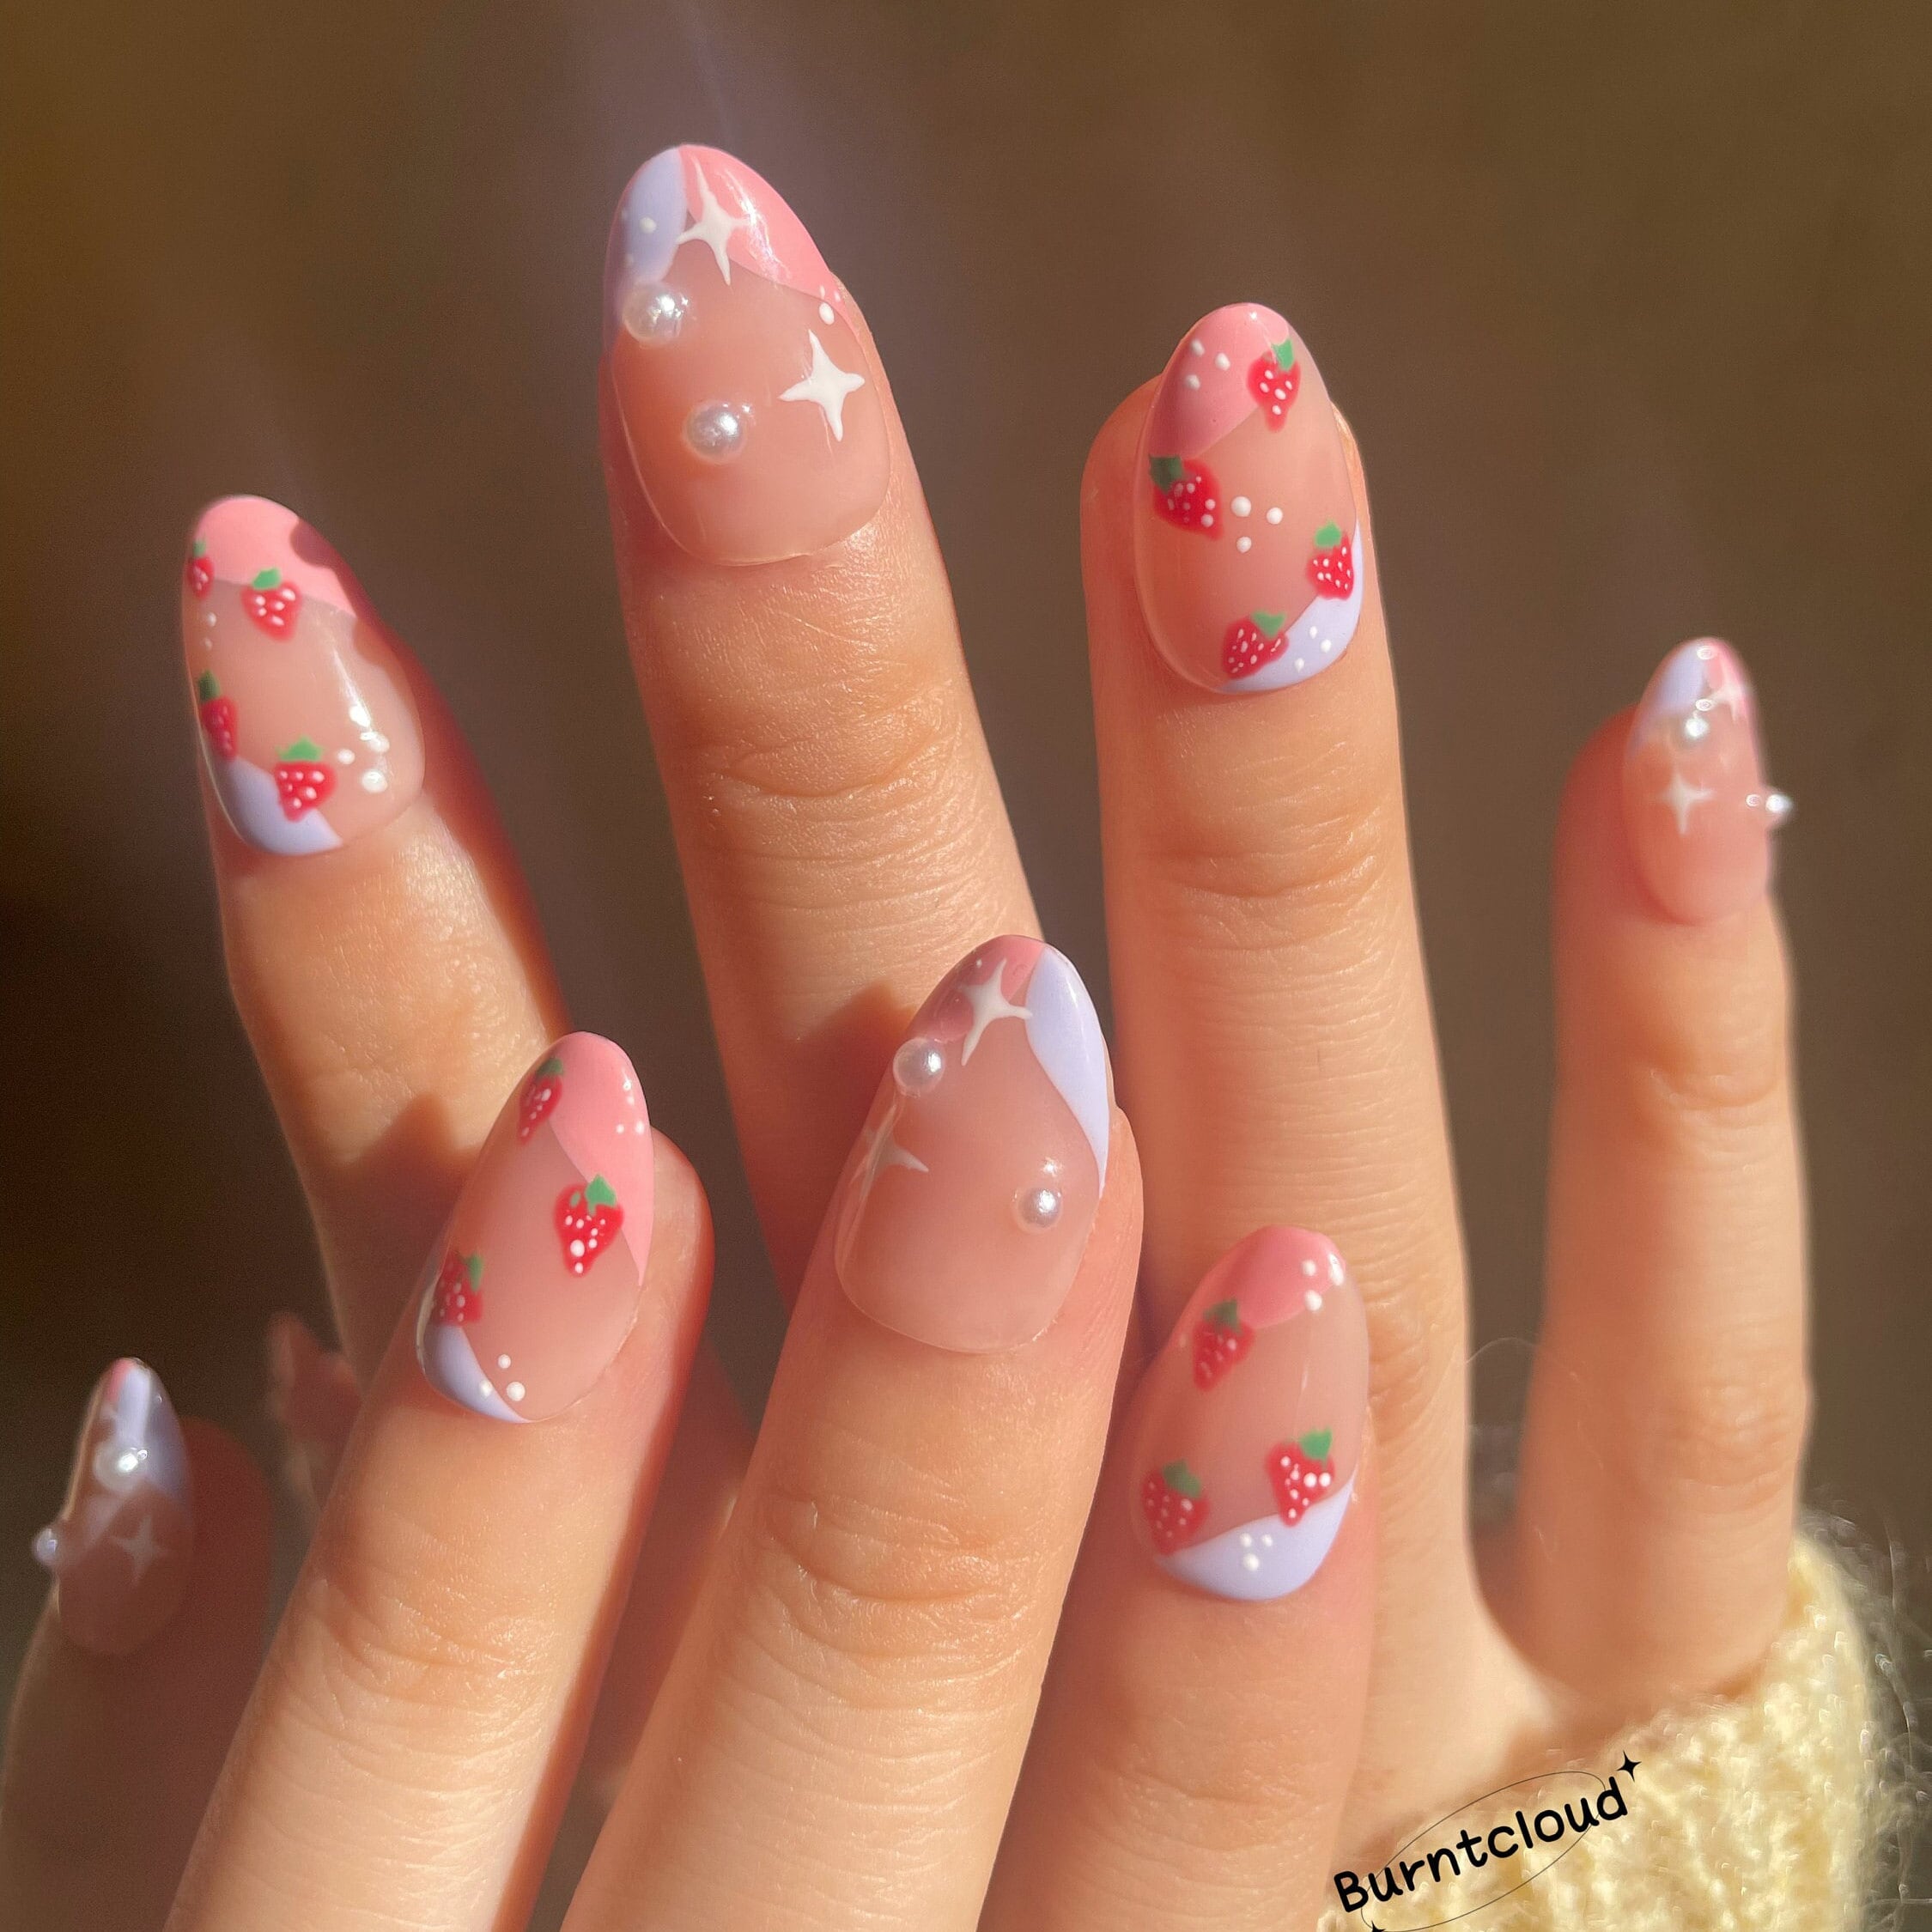 Sanrio Hello Kitty Nail Stickers Full Wraps Polish Strips Cute Gift Manicure  Pedicure SET A BUY ONE GET ONE FREE Inspired by You.